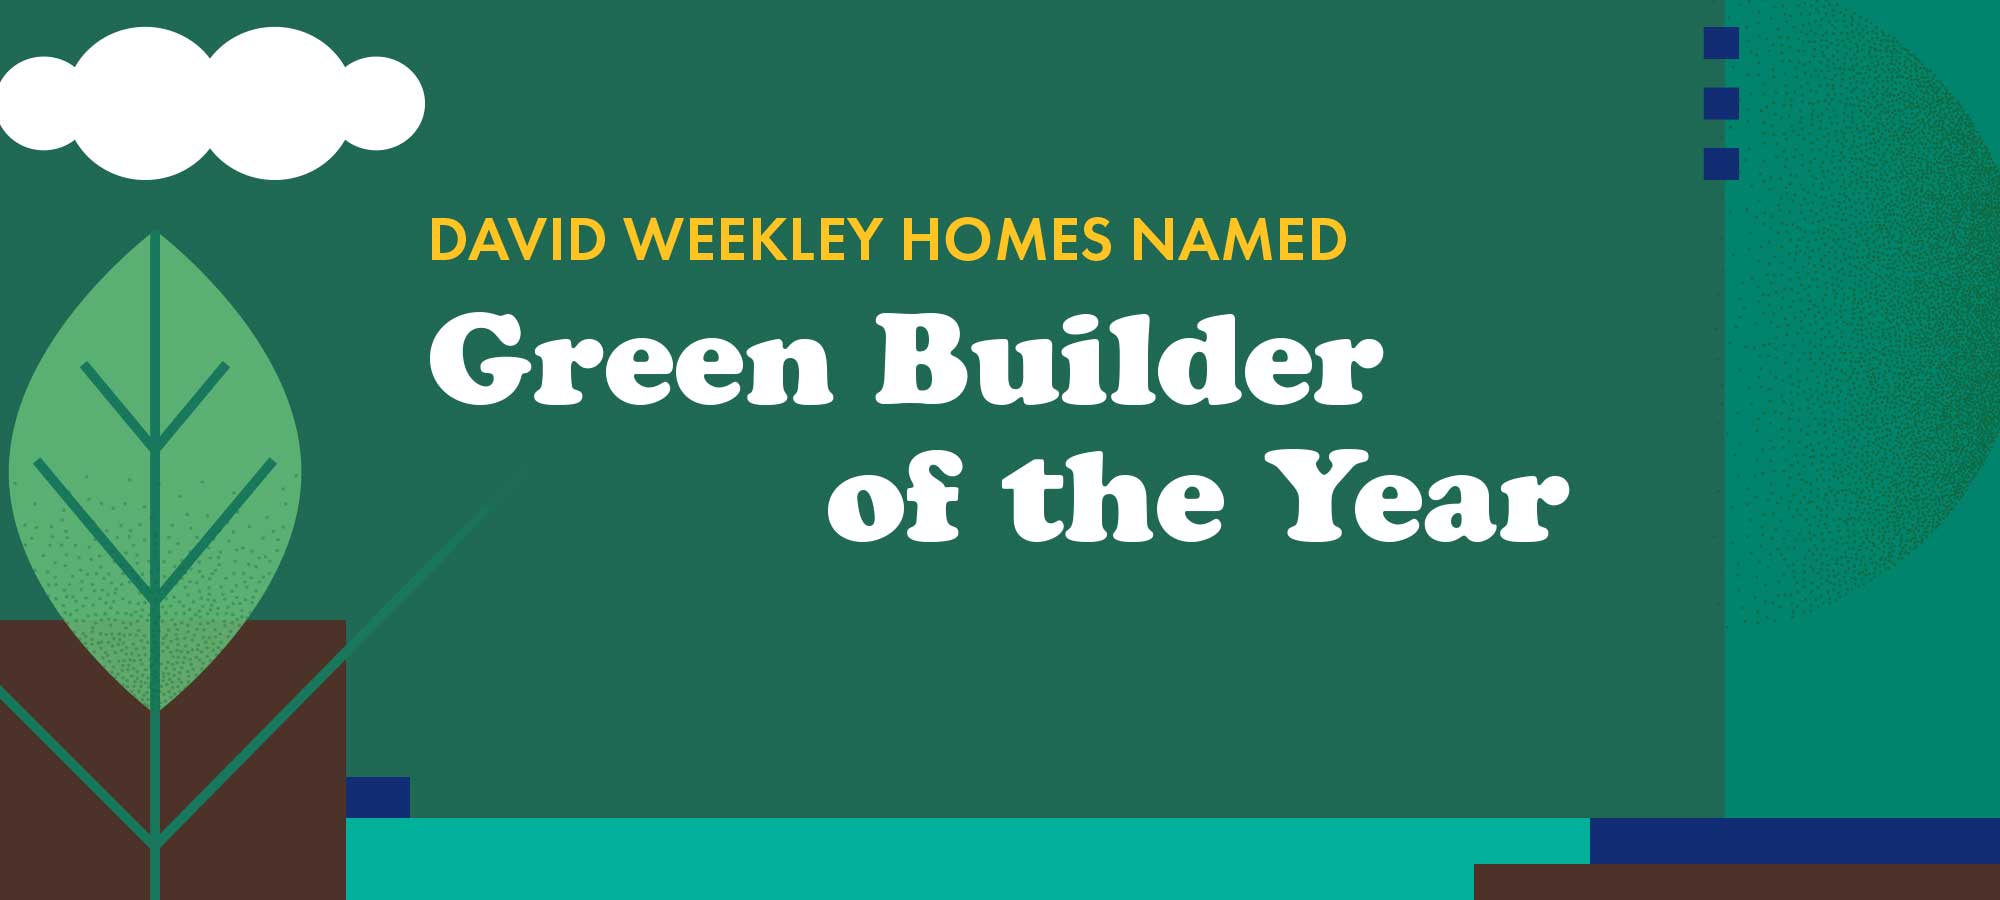 David Weekley Homes Named Green Builder of the Year